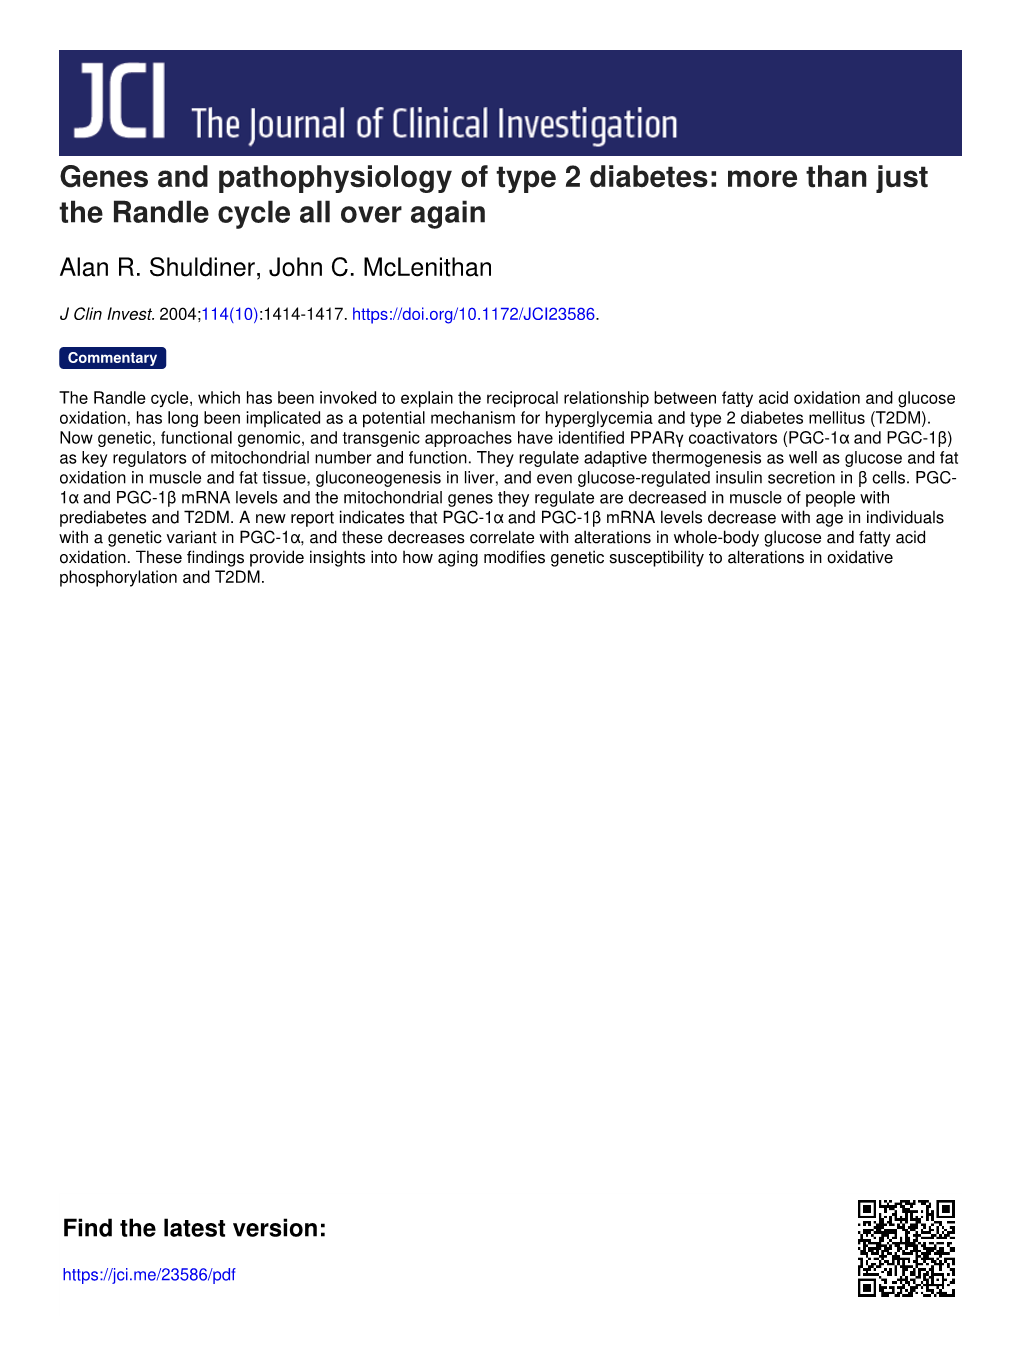 Genes and Pathophysiology of Type 2 Diabetes: More Than Just the Randle Cycle All Over Again